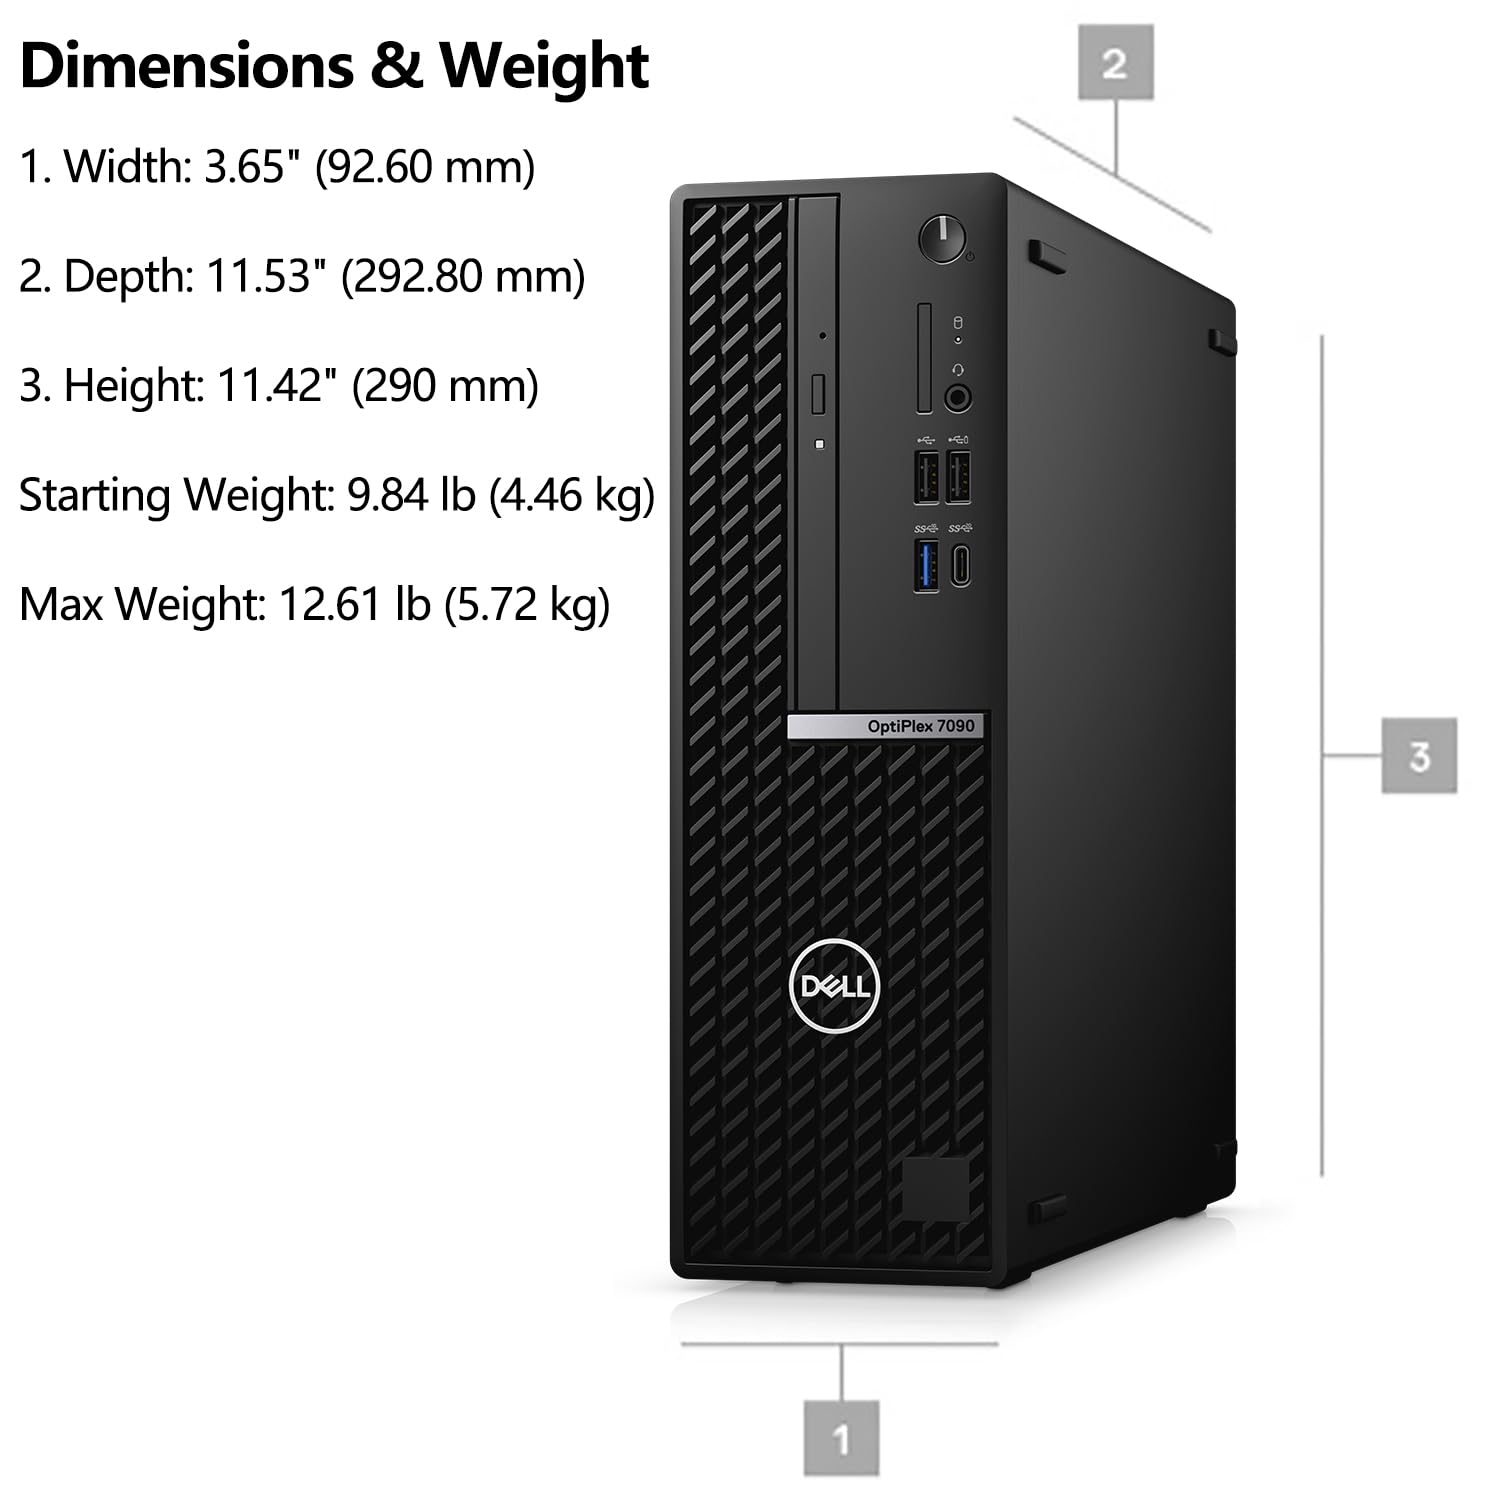 Dell OptiPlex 7000 7090 SFF Small Form Factor Business Desktop Computer, Intel Octa-Core i7-11700 Up to 4.9GHz, 32GB DDR4 RAM, 2TB PCIe SSD, DVDRW, WiFi, Bluetooth, Keyboard & Mouse, Windows 11 Pro